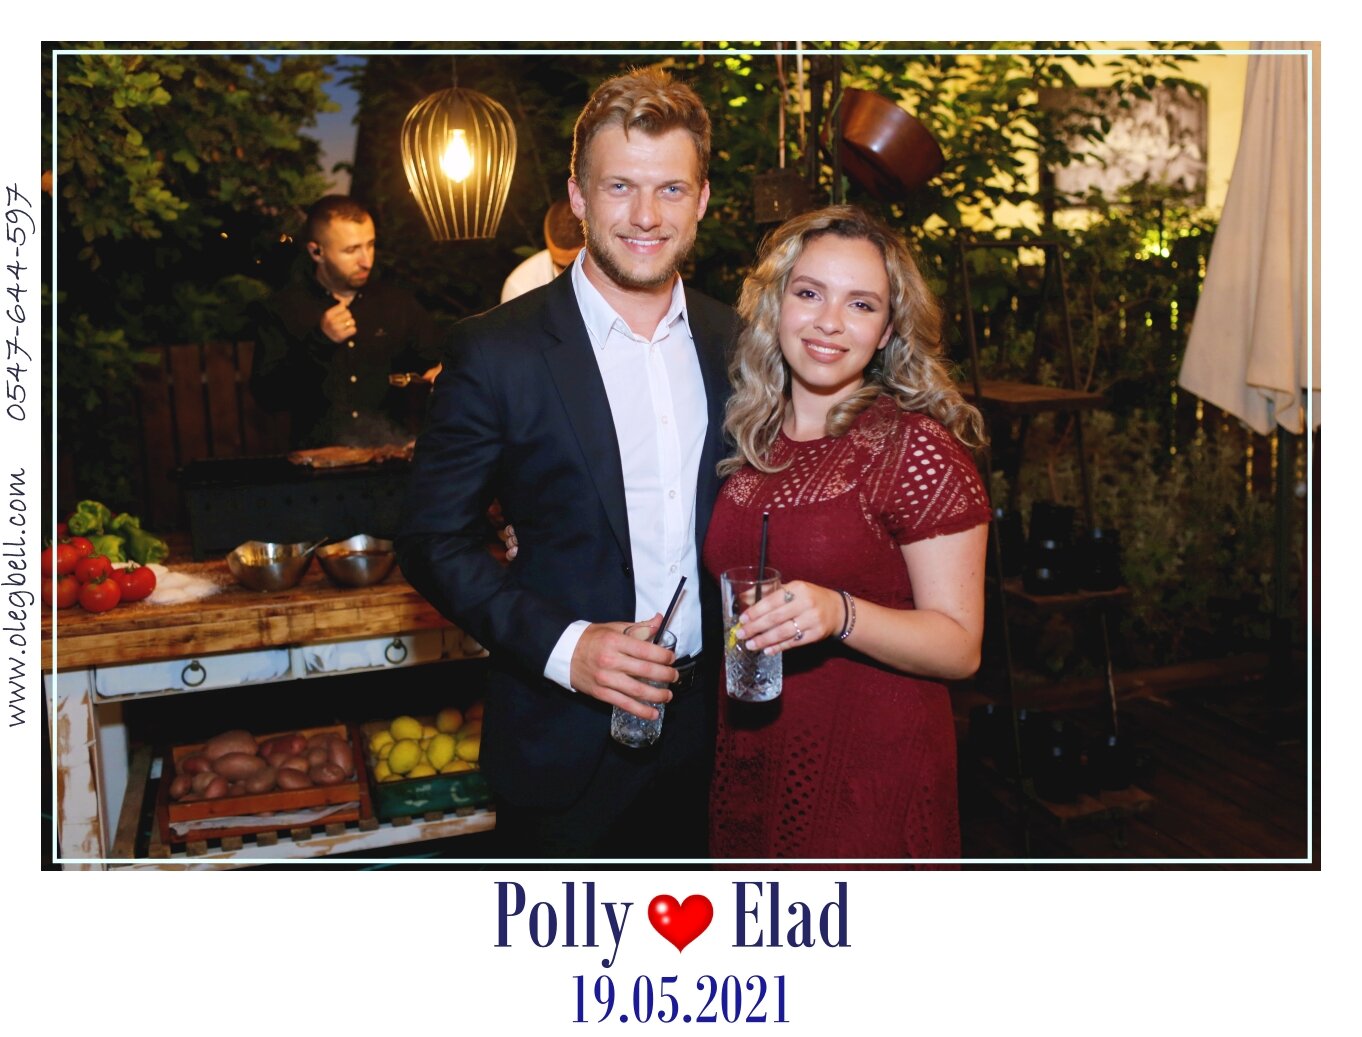 POLLY_AND_ELAD_WD_MG_SITE_012.JPG